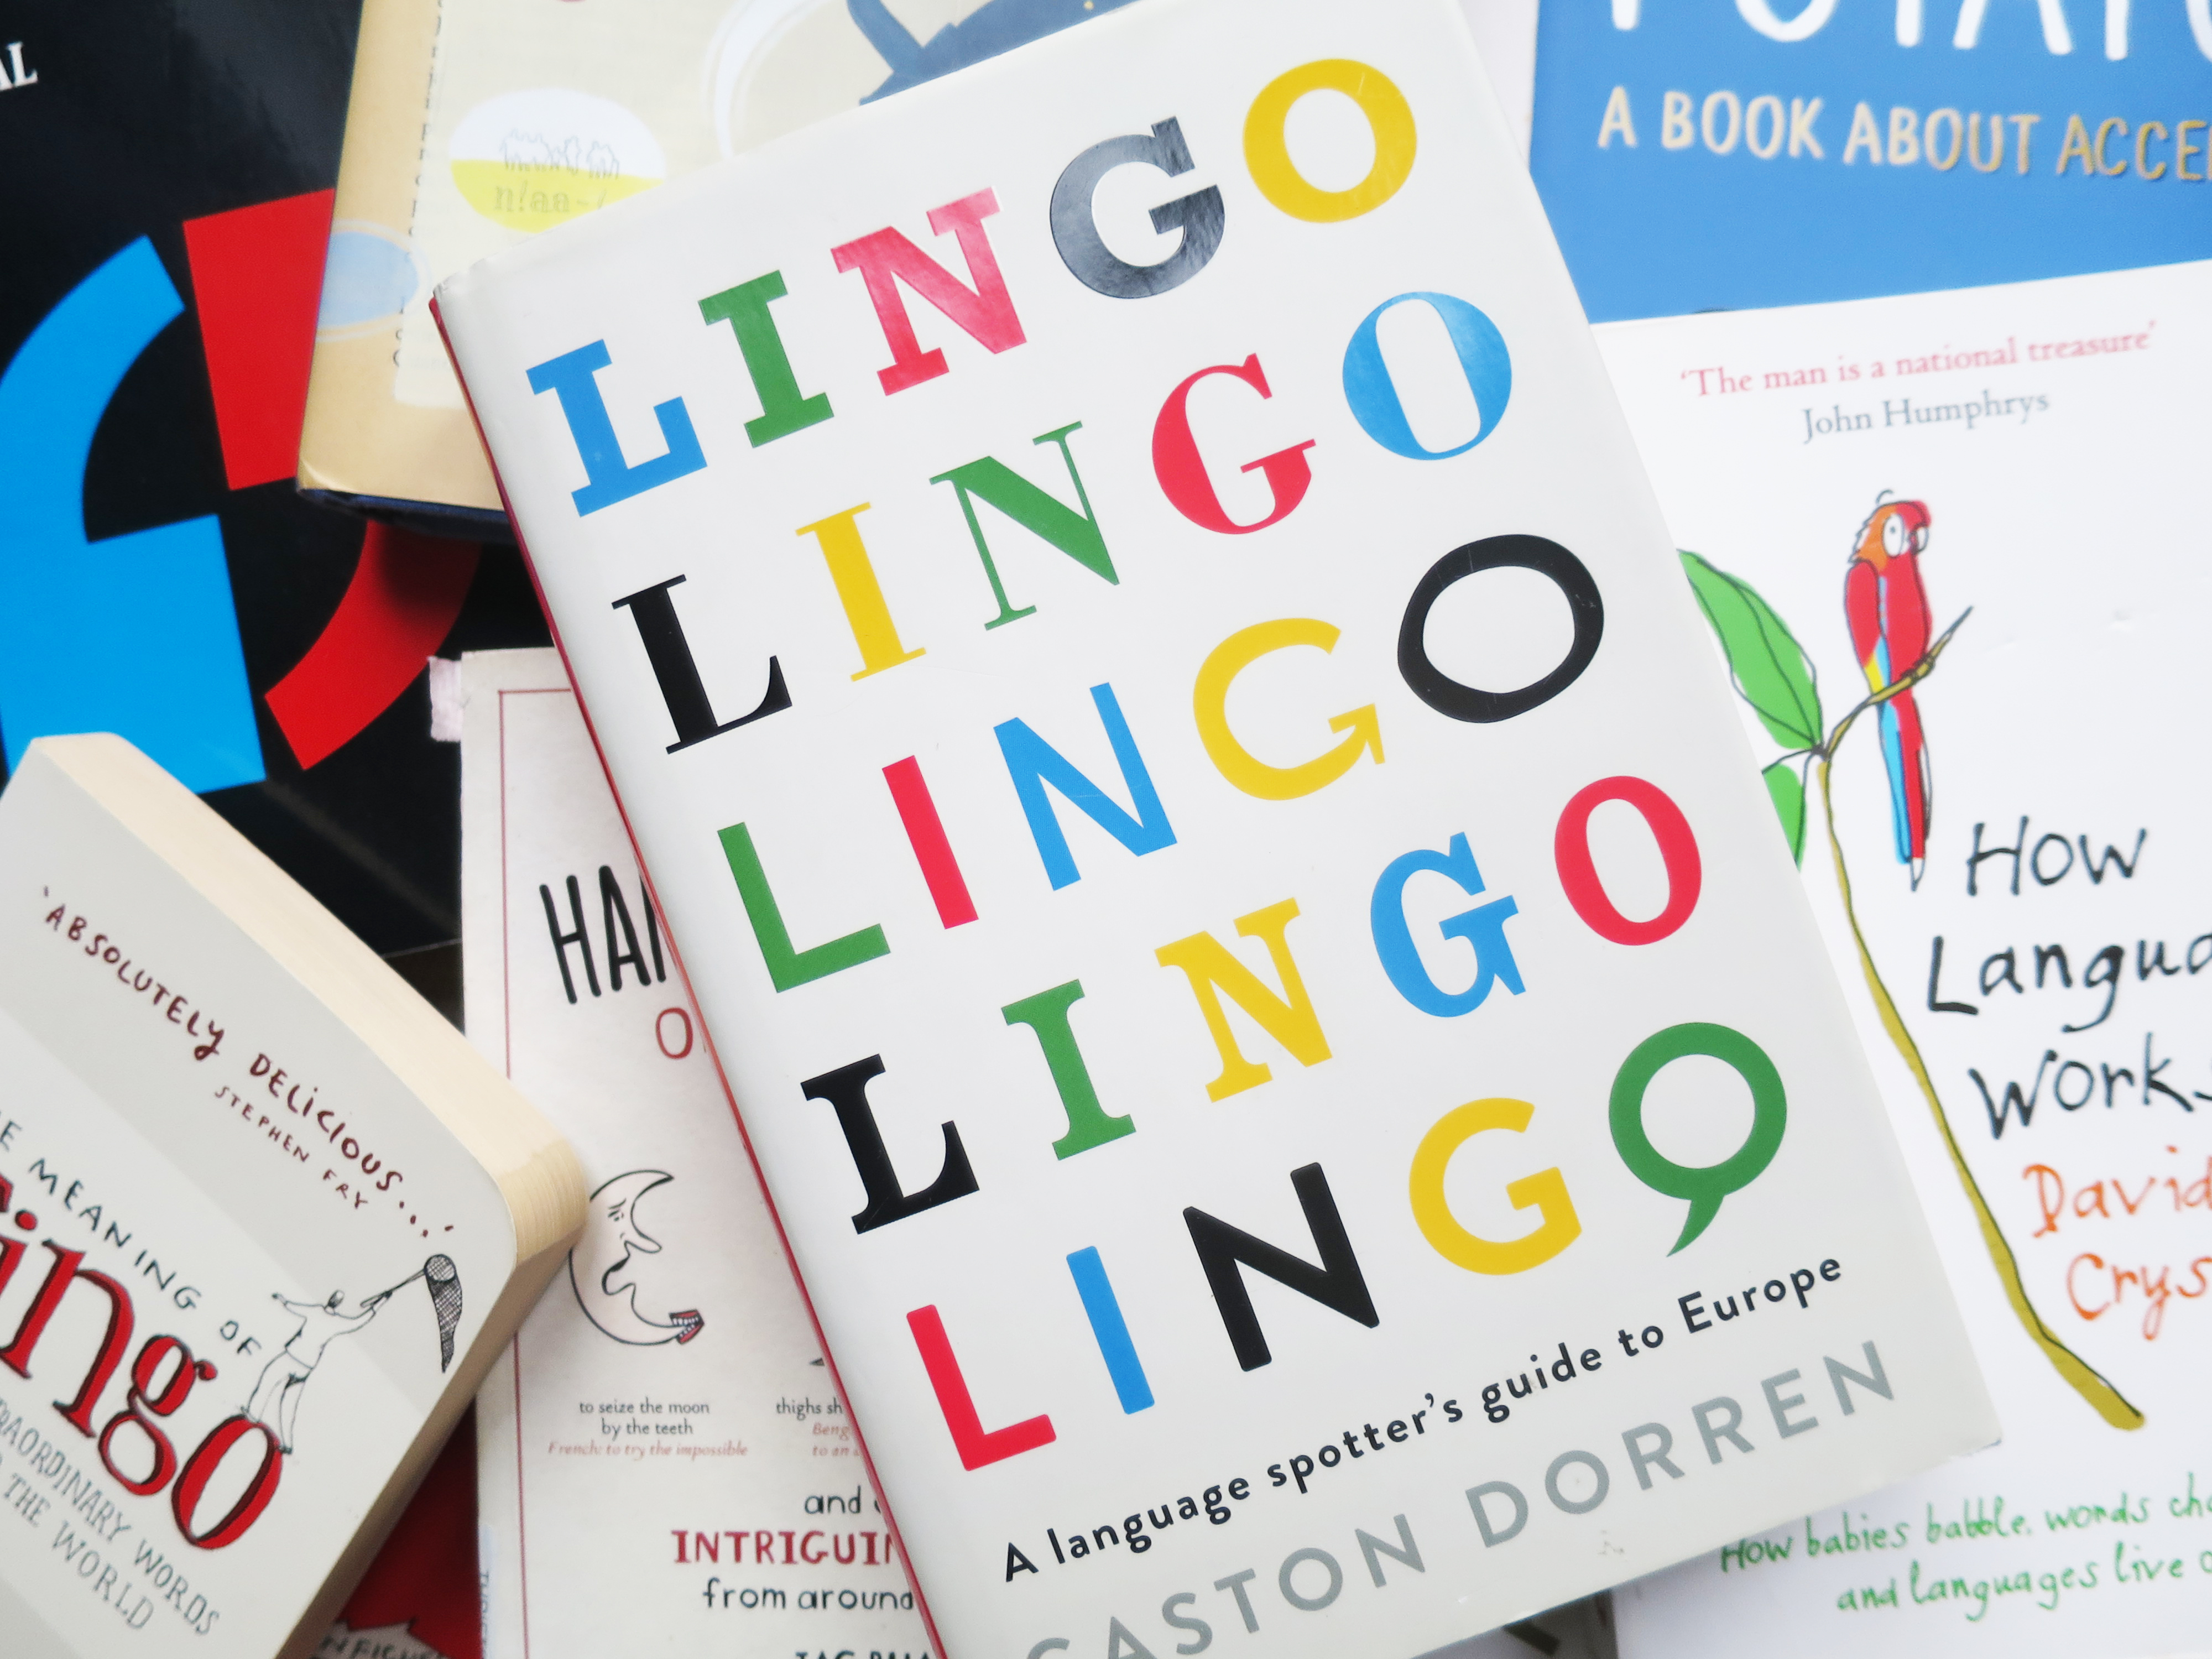 If you love languages, chances are you love reading books about language and linguistics too. Here's 10 of my favourite inspiring books about language and linguistics.